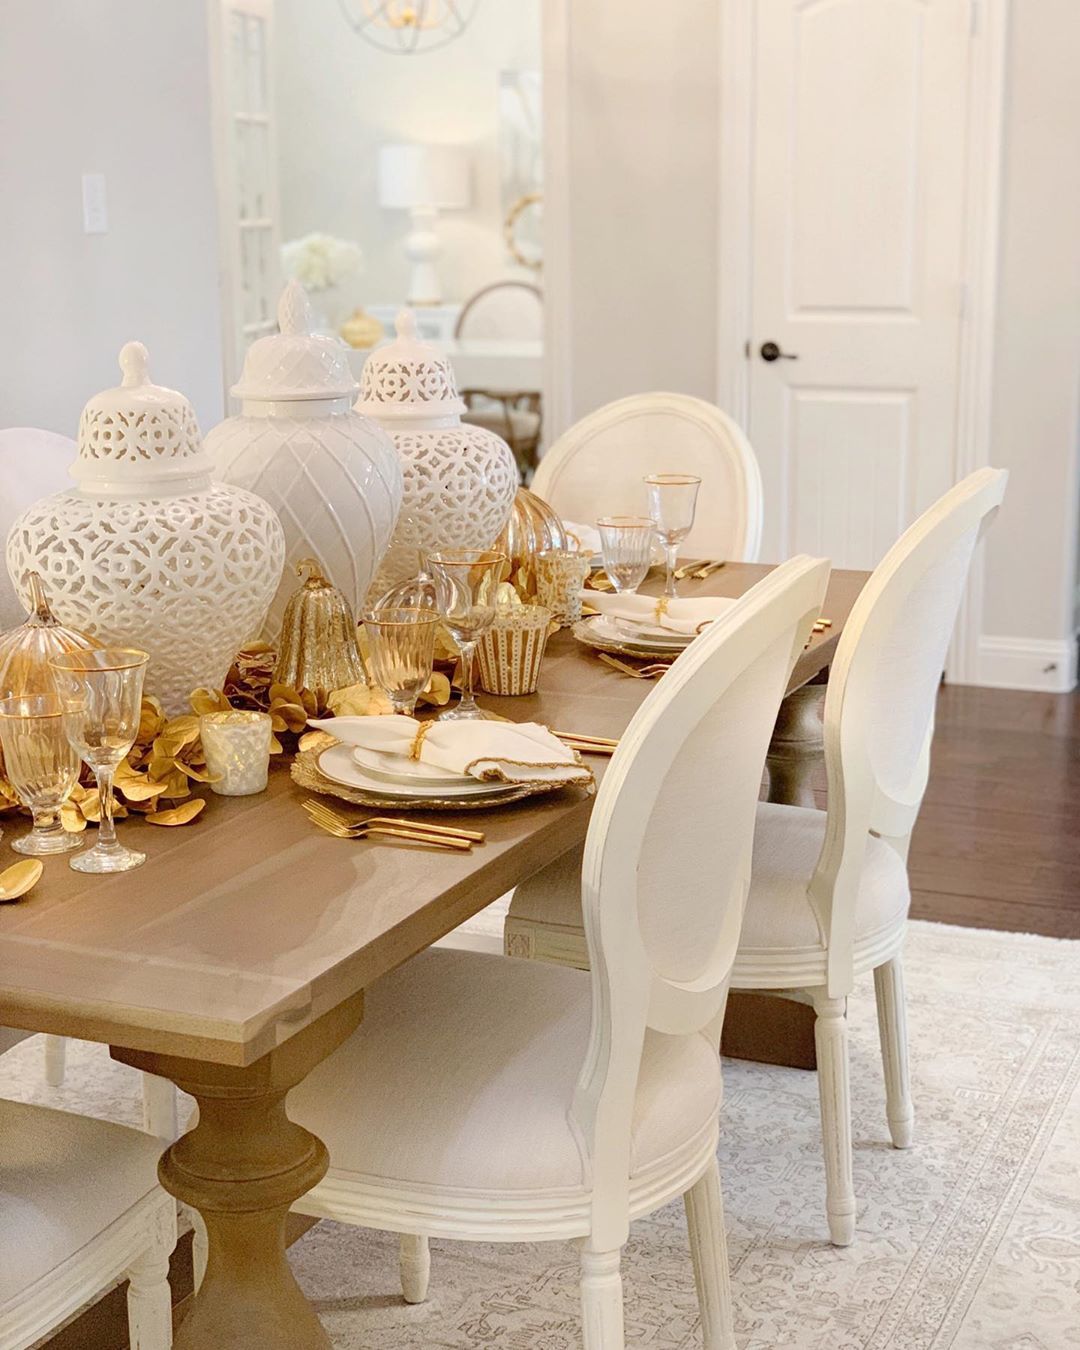 Glam Dining Room with Gold Table Setting via @thedecordiet